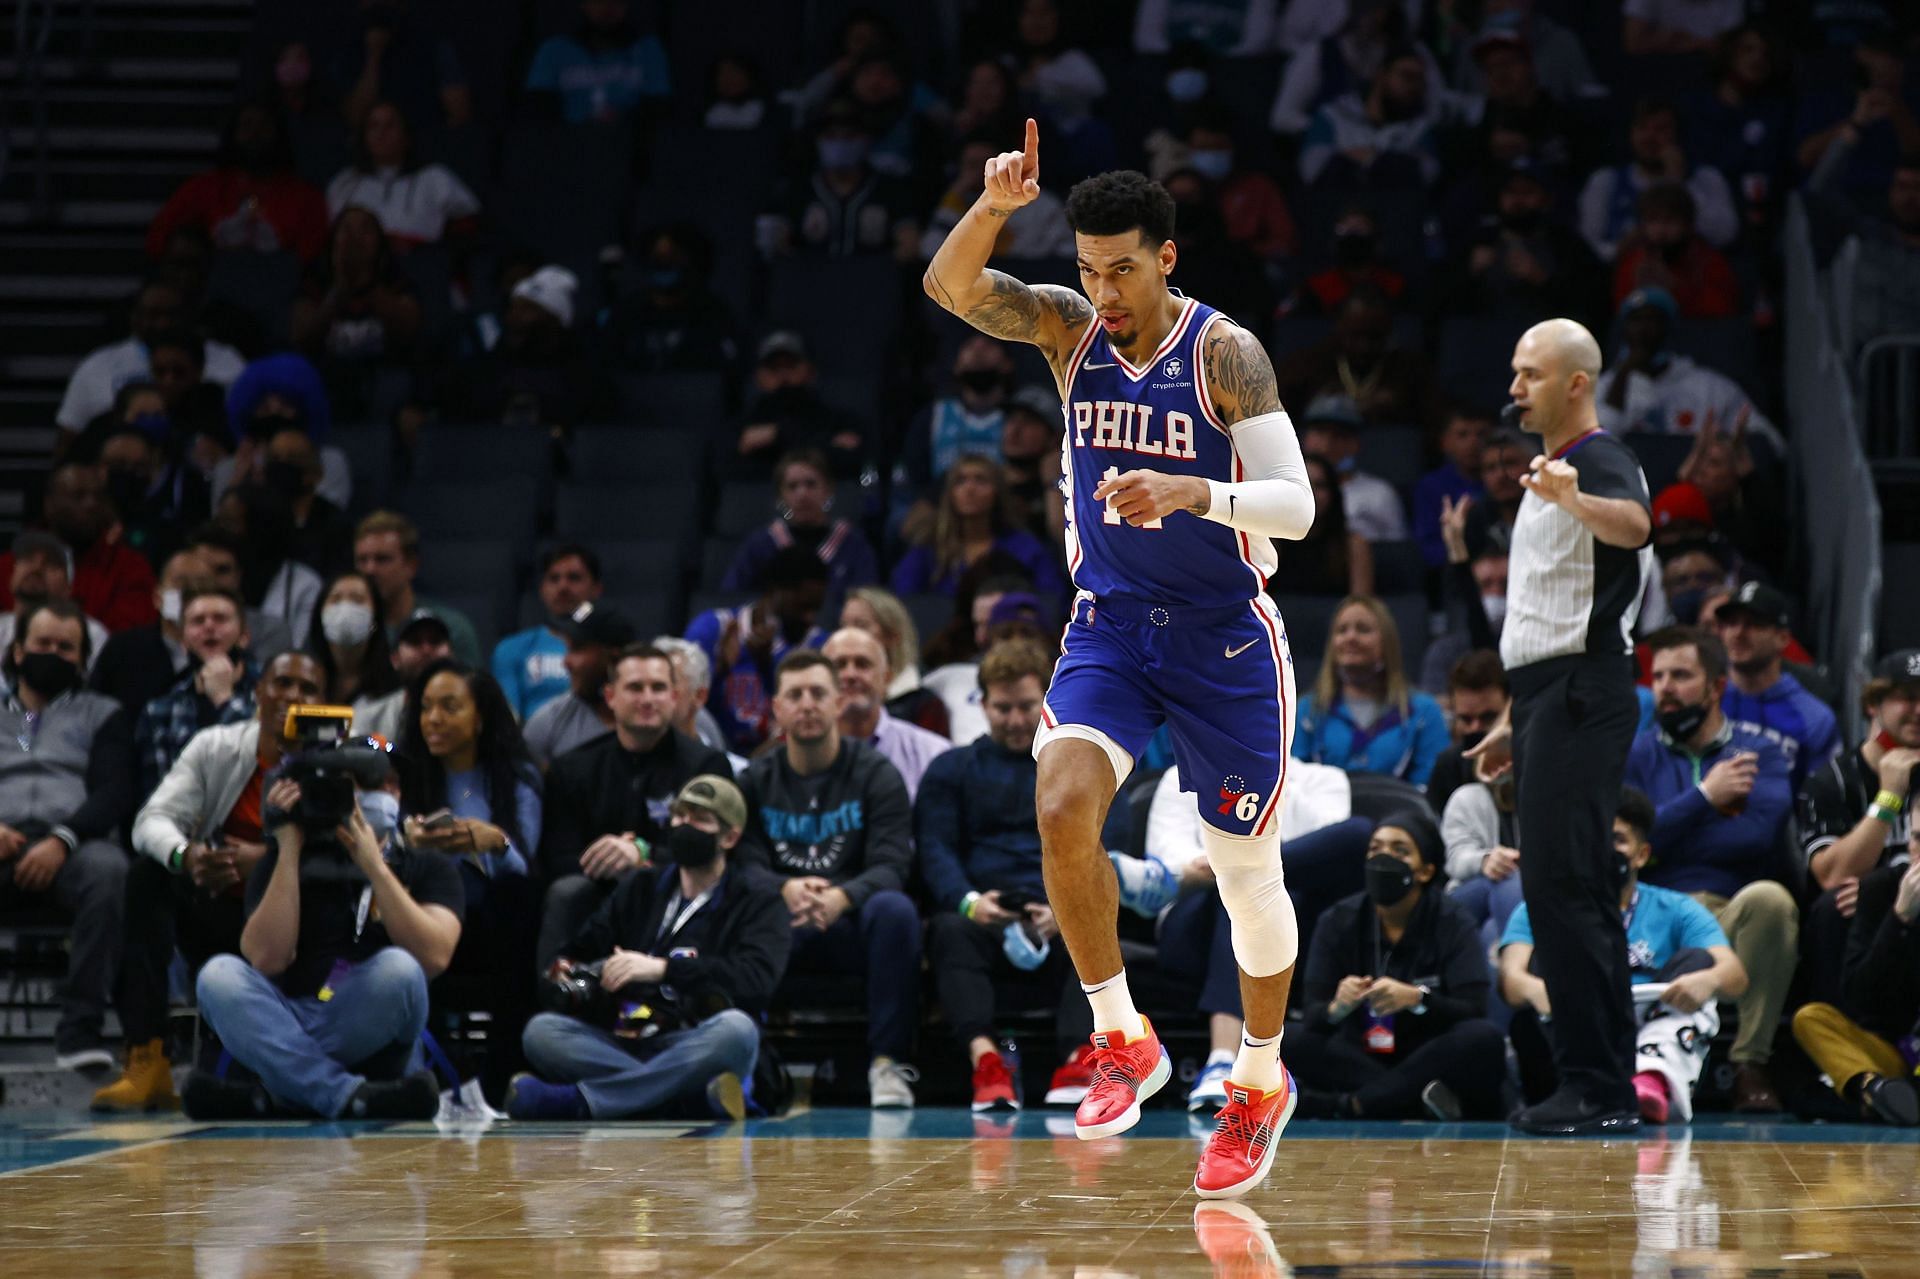 Danny Green runs back to defend after scoring